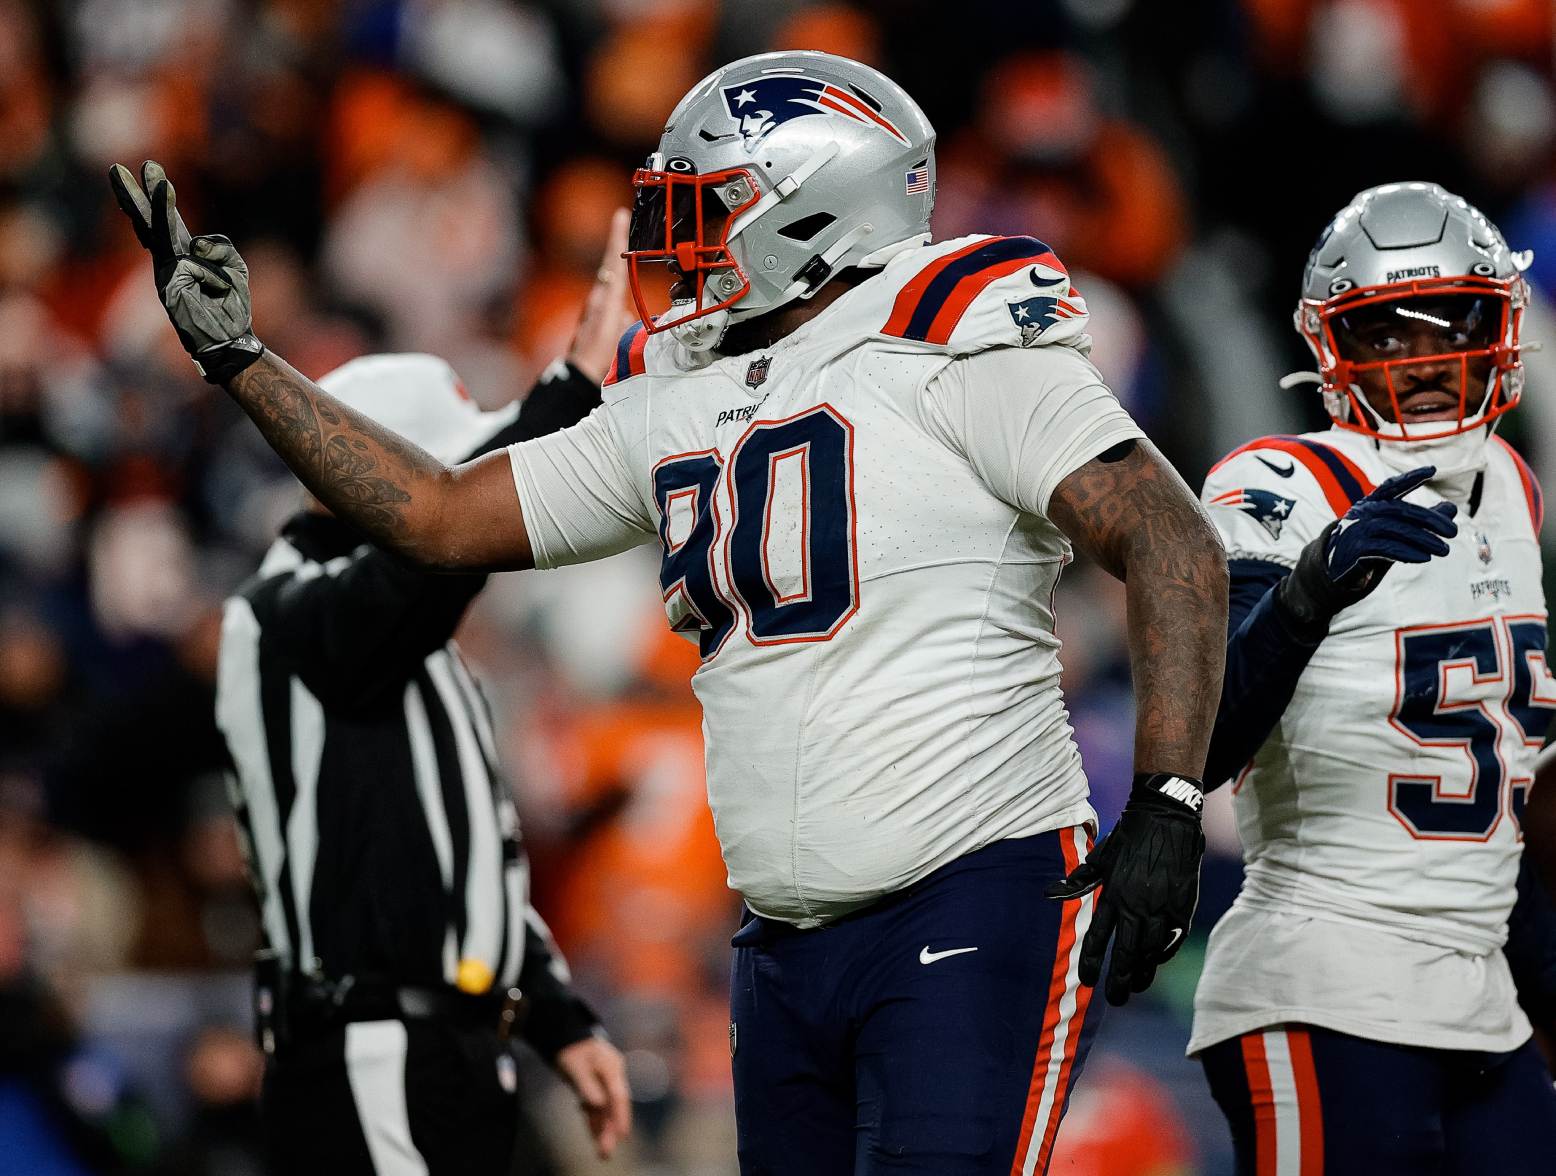 Dec 24, 2023; Denver, Colorado, USA; New England Patriots defensive tackle Christian Barmore (90) reacts after a play ]in the third quarter against the Denver Broncos at Empower Field at Mile High. Credit: Isaiah J. Downing-USA TODAY Sports